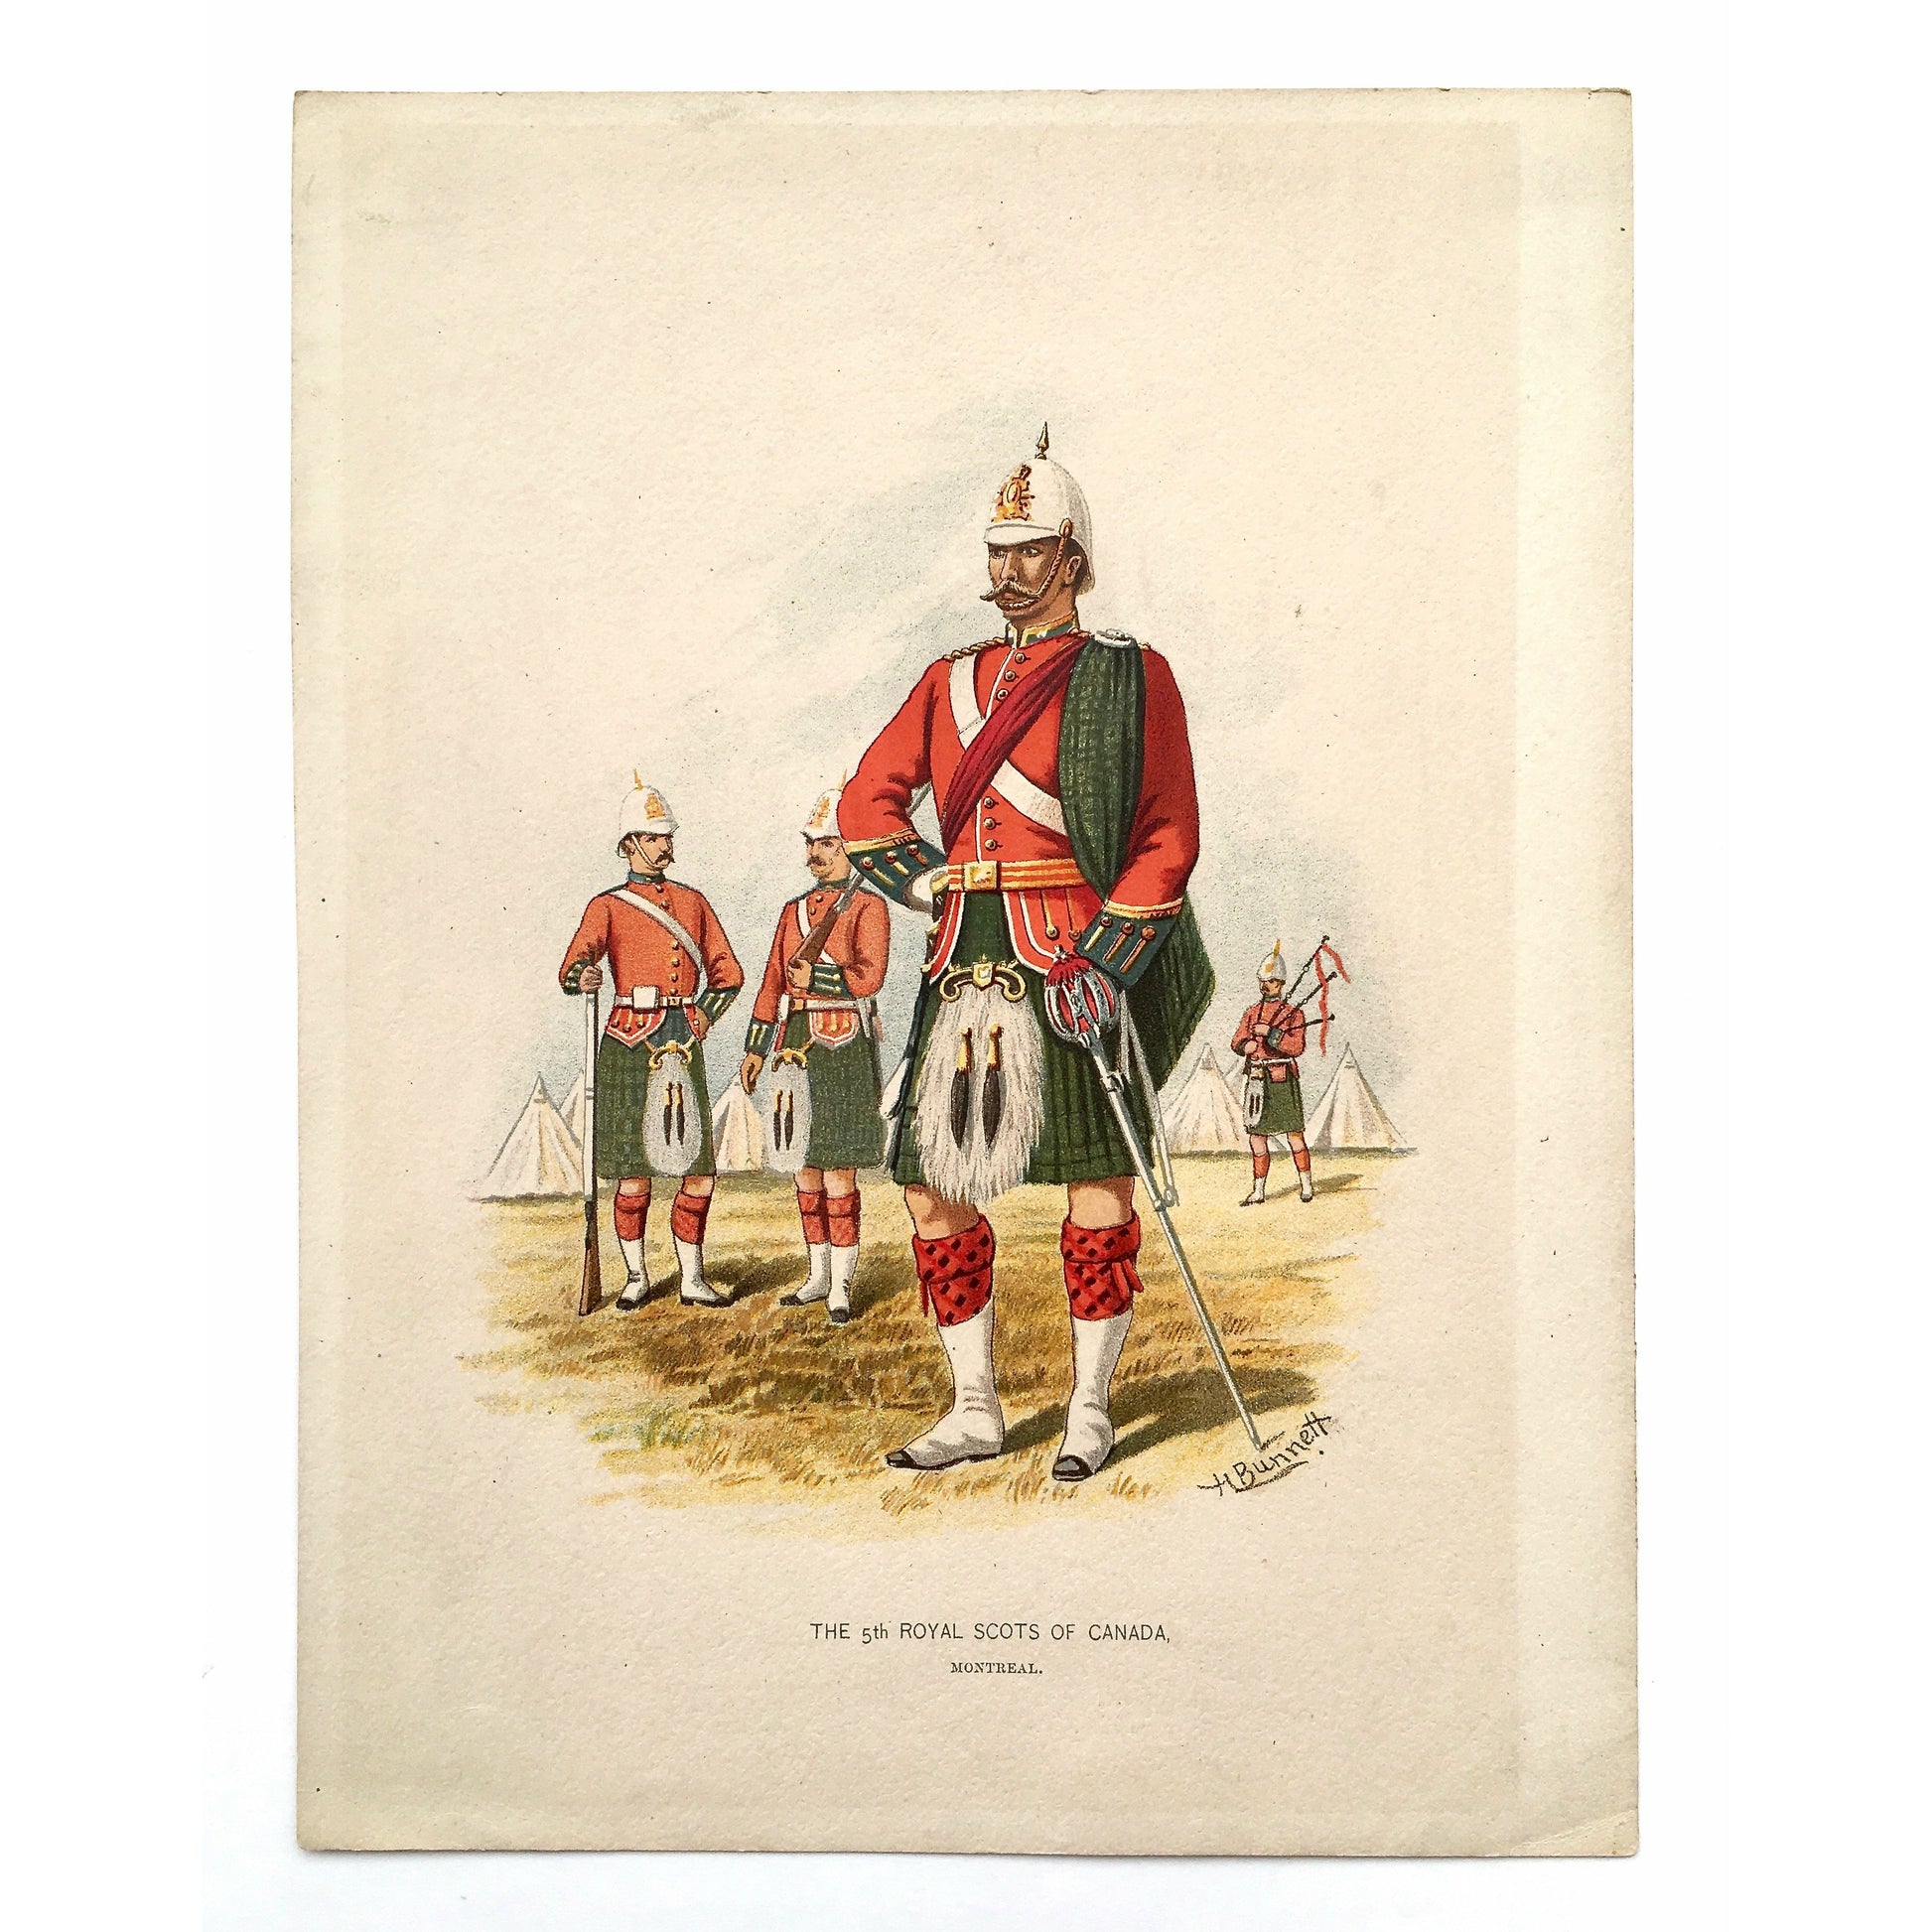 The 5th Royal Scots of Canada, Scots, Royal Scots, Scottish, Scotland, Kilts, bagpipes, Montreal, Canada, Artillery, Military, Military Costume, Horses, Riding, Costume, Uniform, Her Majesty's Army, Regiments, Queen's Forces, H. Bunnett, Bunnett, Sword, Army, London, 1890, Military Prints, Canadian, Canadian Military, Canadian Army, Armed Forces, Military Uniform, Chromolithograph, J. S. Virtue & Co., Antique Prints, Antique, Prints, Original, Original Prints, Art History, Military History, Interior Decor, 